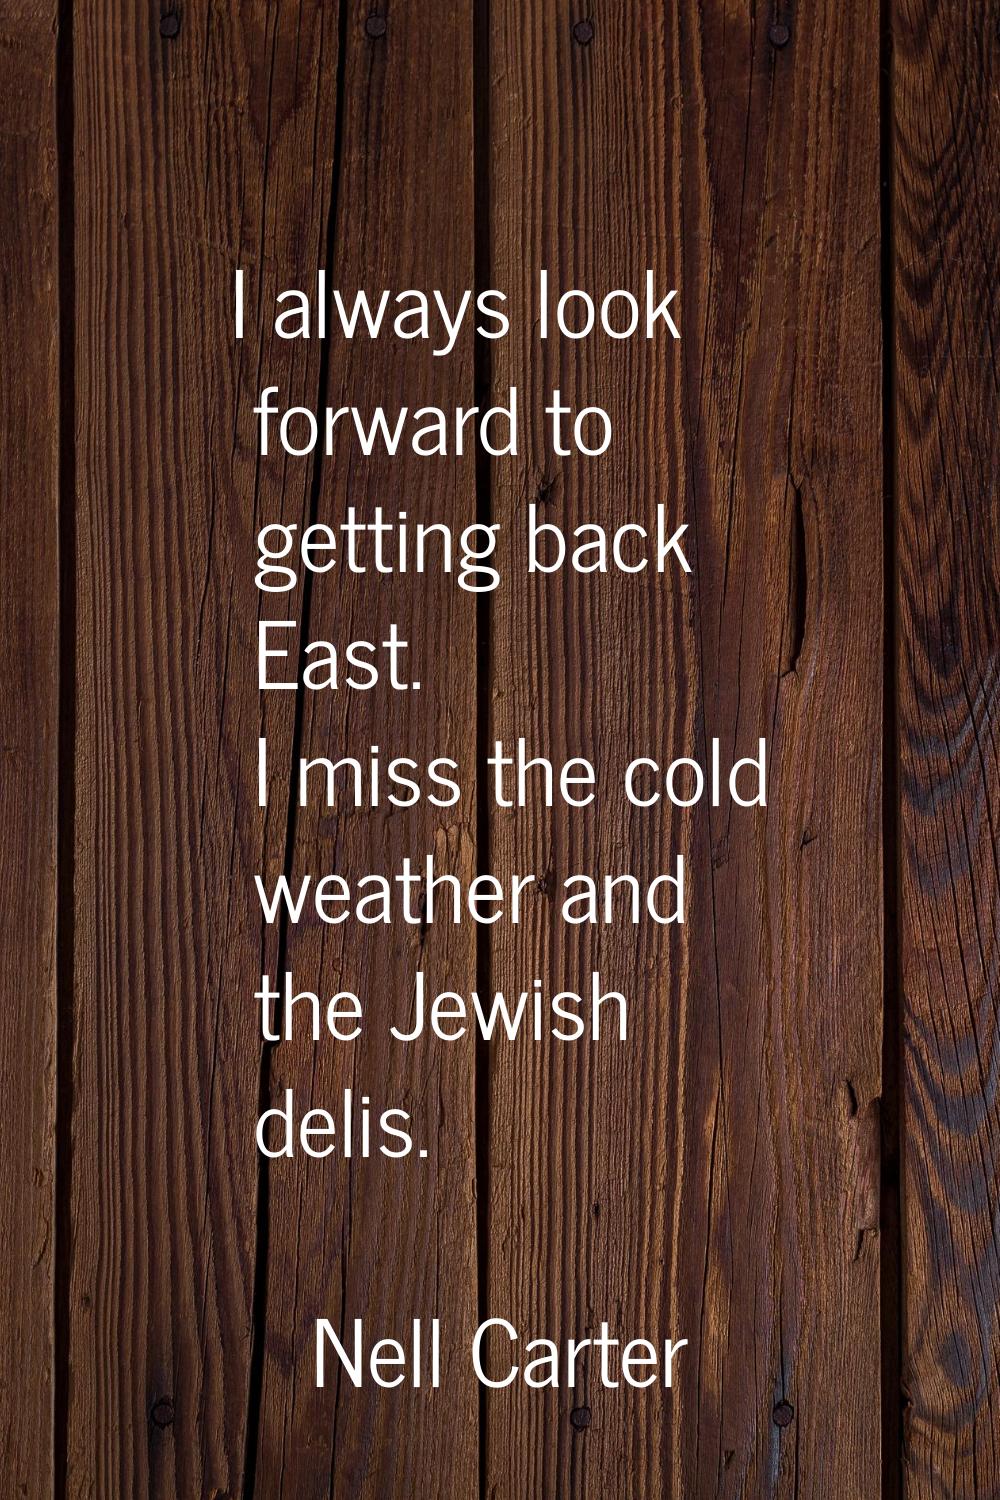 I always look forward to getting back East. I miss the cold weather and the Jewish delis.